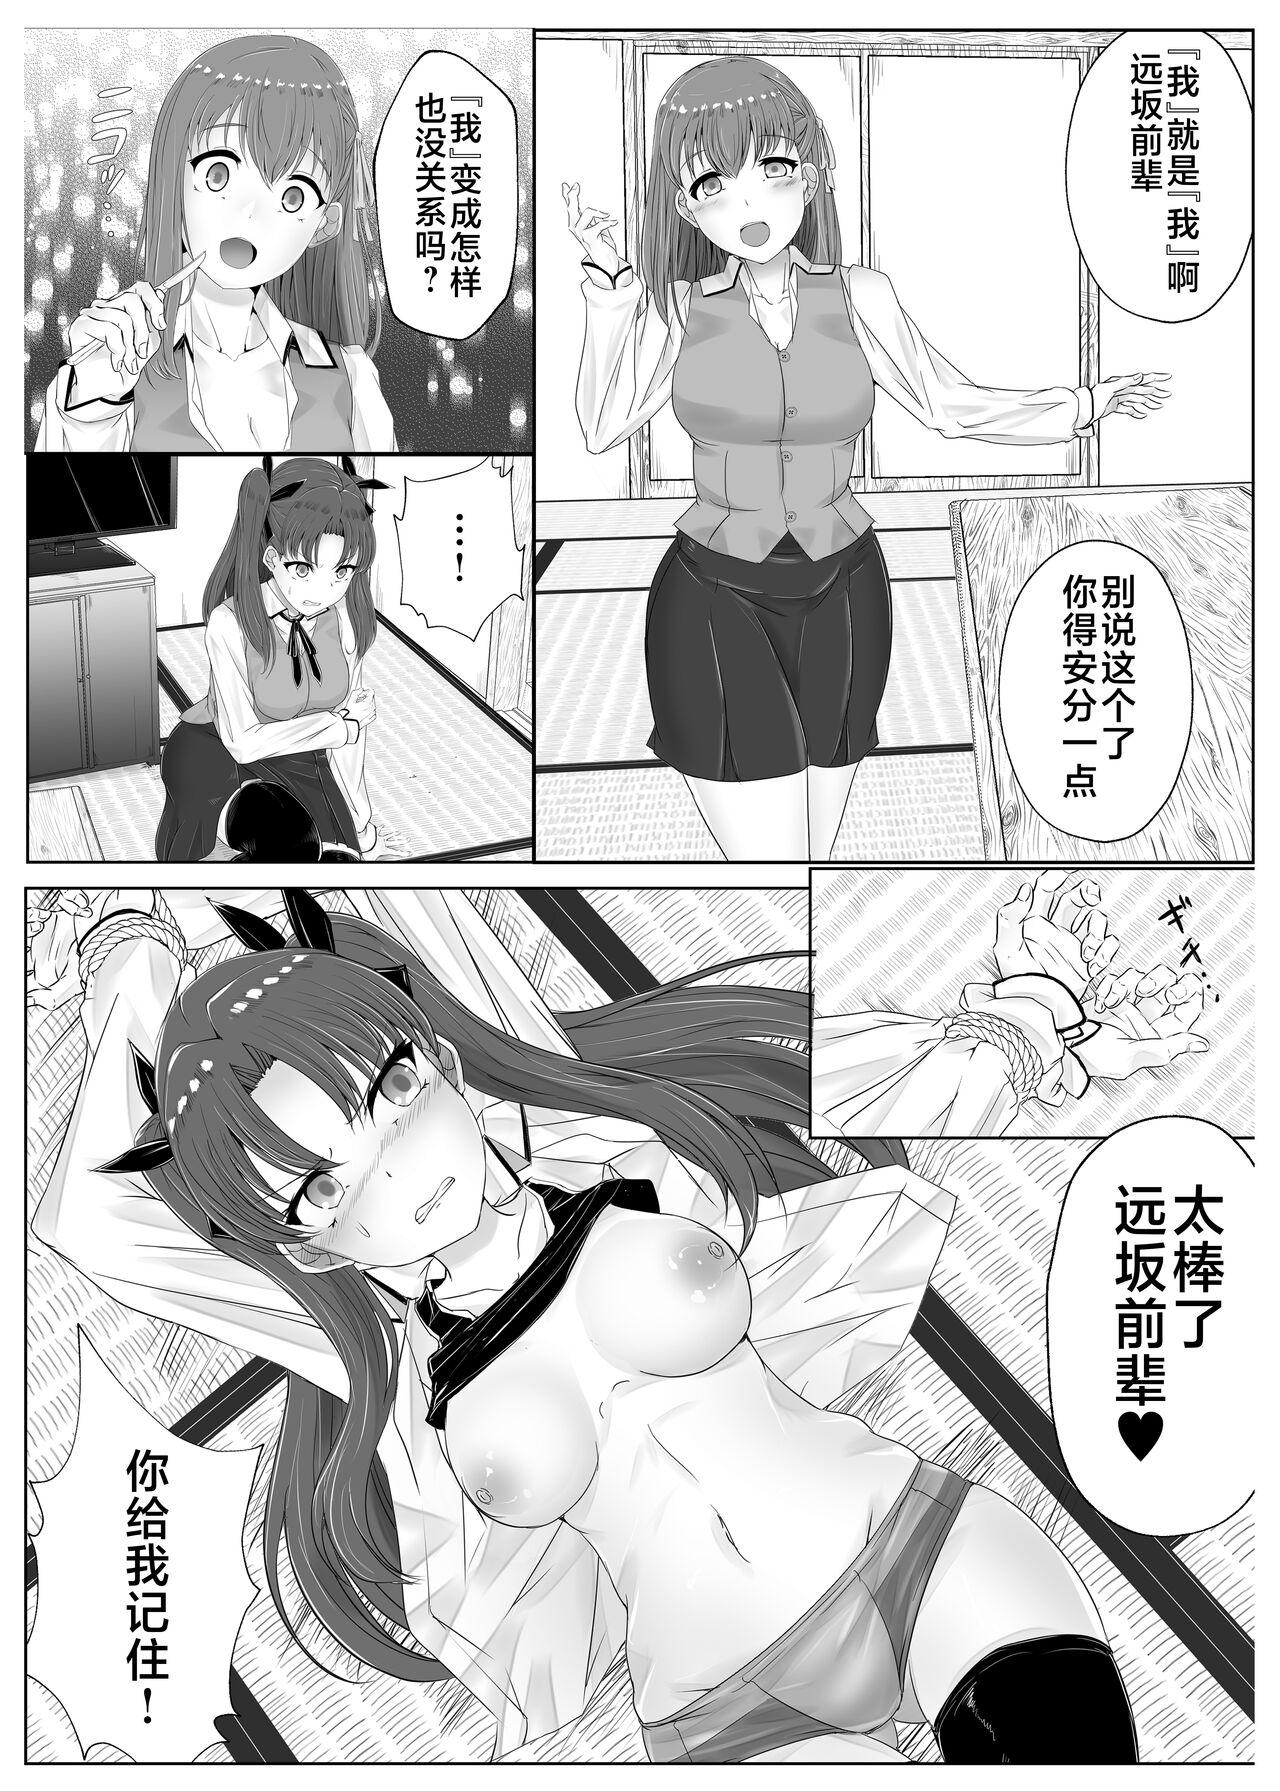 Transexual 遠坂凛乗り換え乗っ取り - Fate stay night Gay Skinny - Page 3